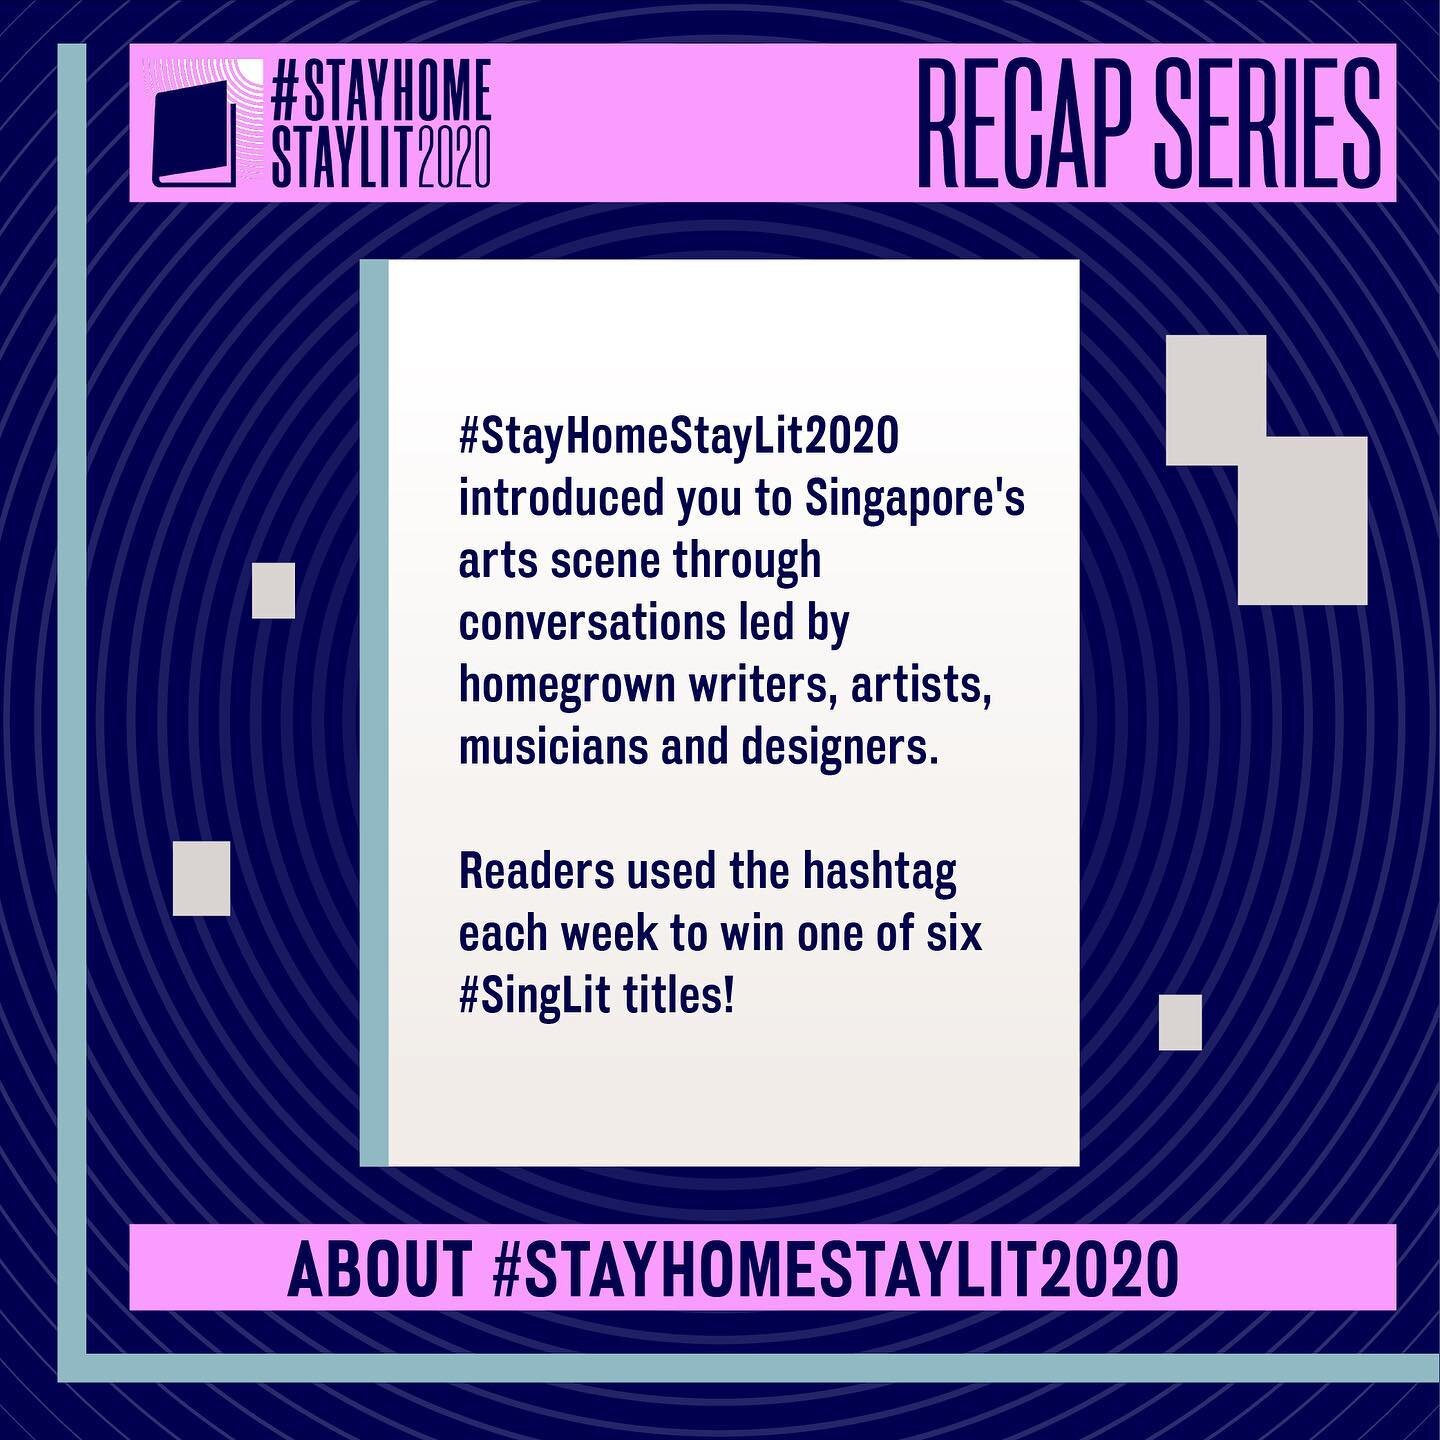 We are immensely grateful for all the support you&rsquo;ve given for #StayHomeStayLit2020, and would like to thank everybody for taking the time to view all the responses that have been done by our homegrown writers, artists, musicians and other crea